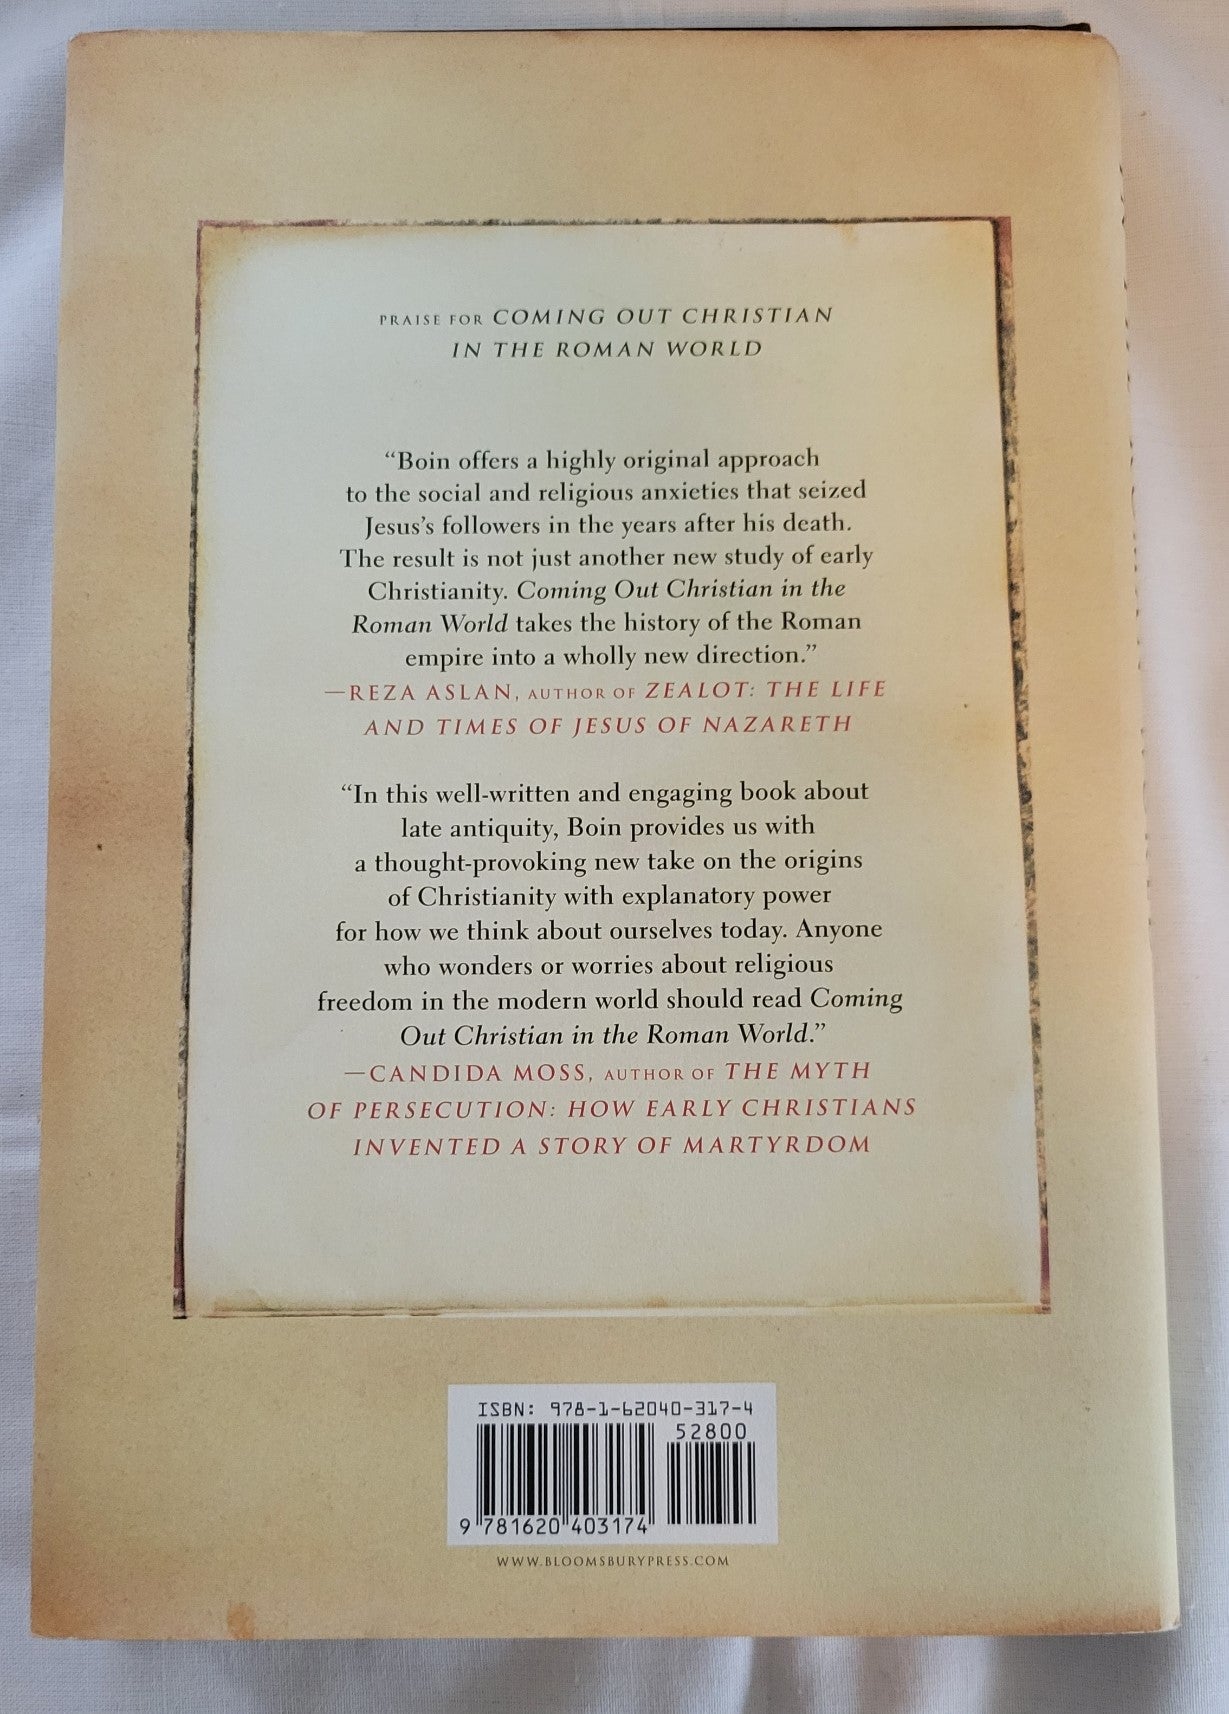 Used book Coming Out Christian in the Roman World written by Douglas Boin.  View of back cover.